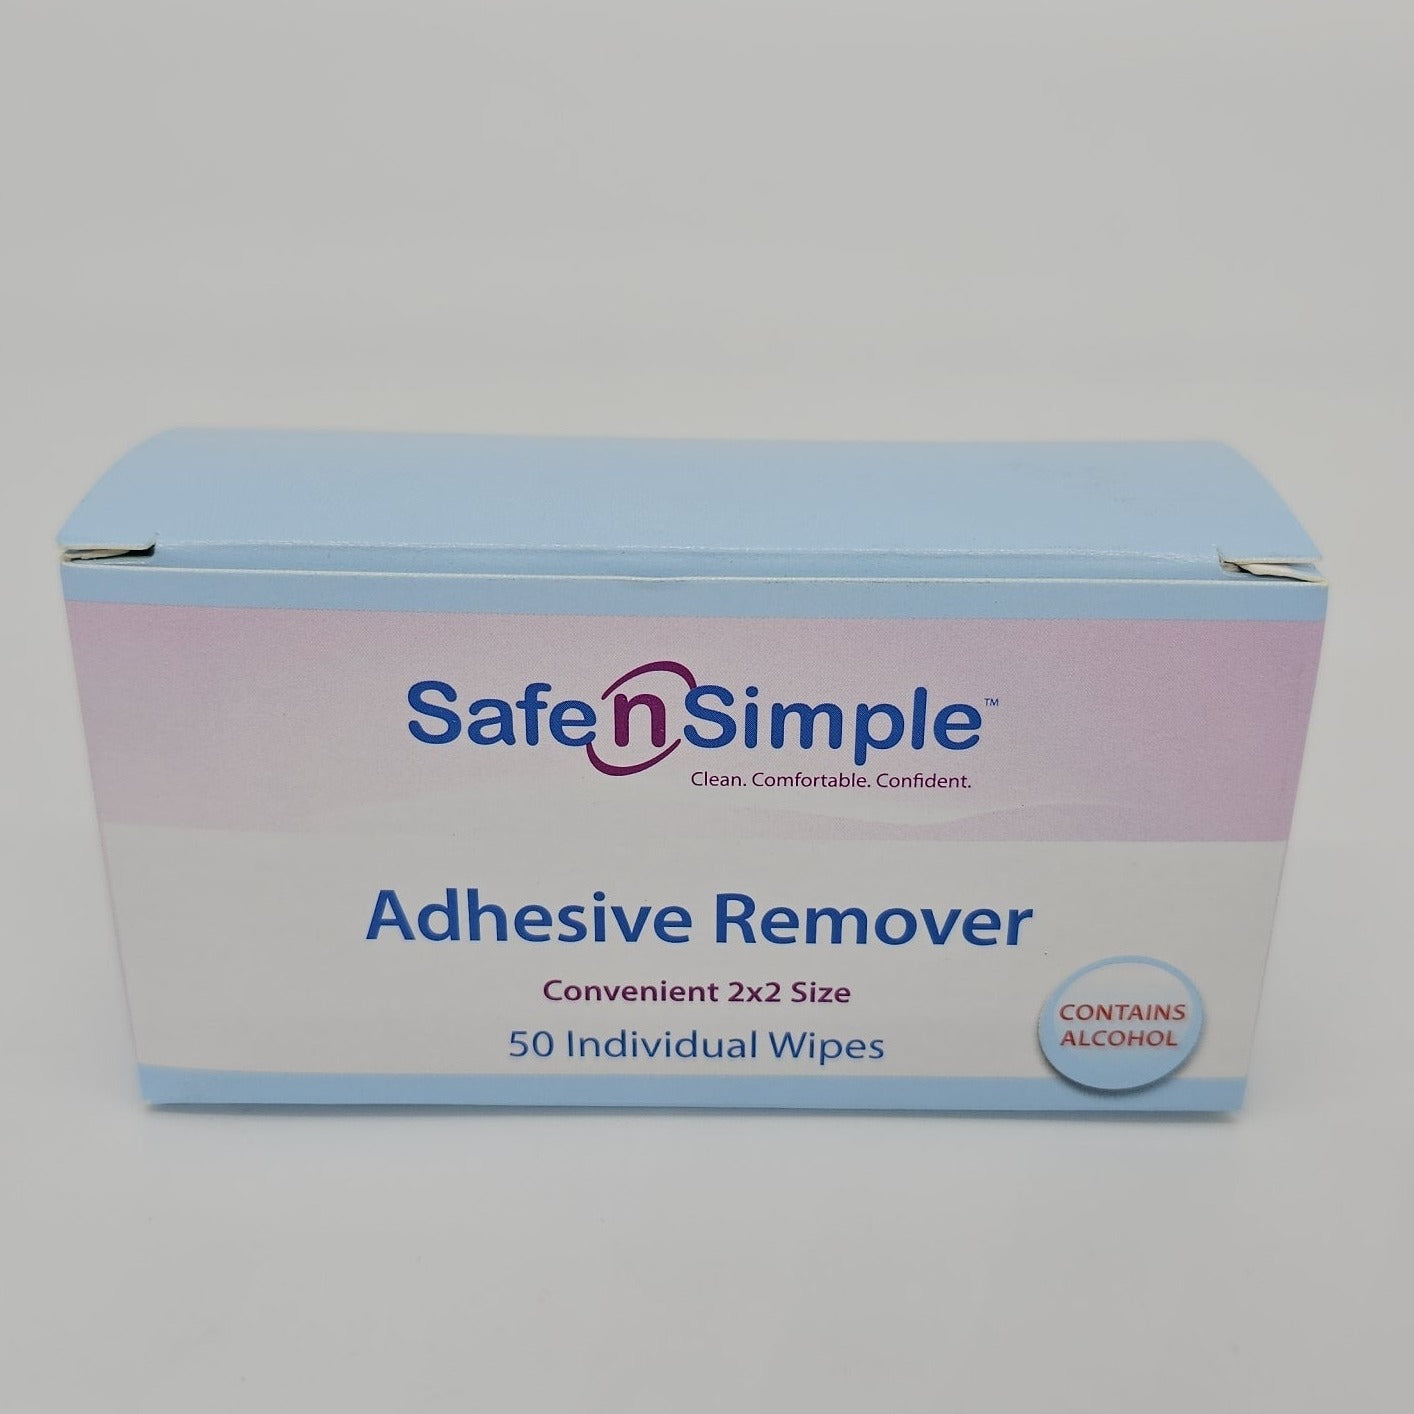 SNS Adhesive Remover | New medical products | SNS medical